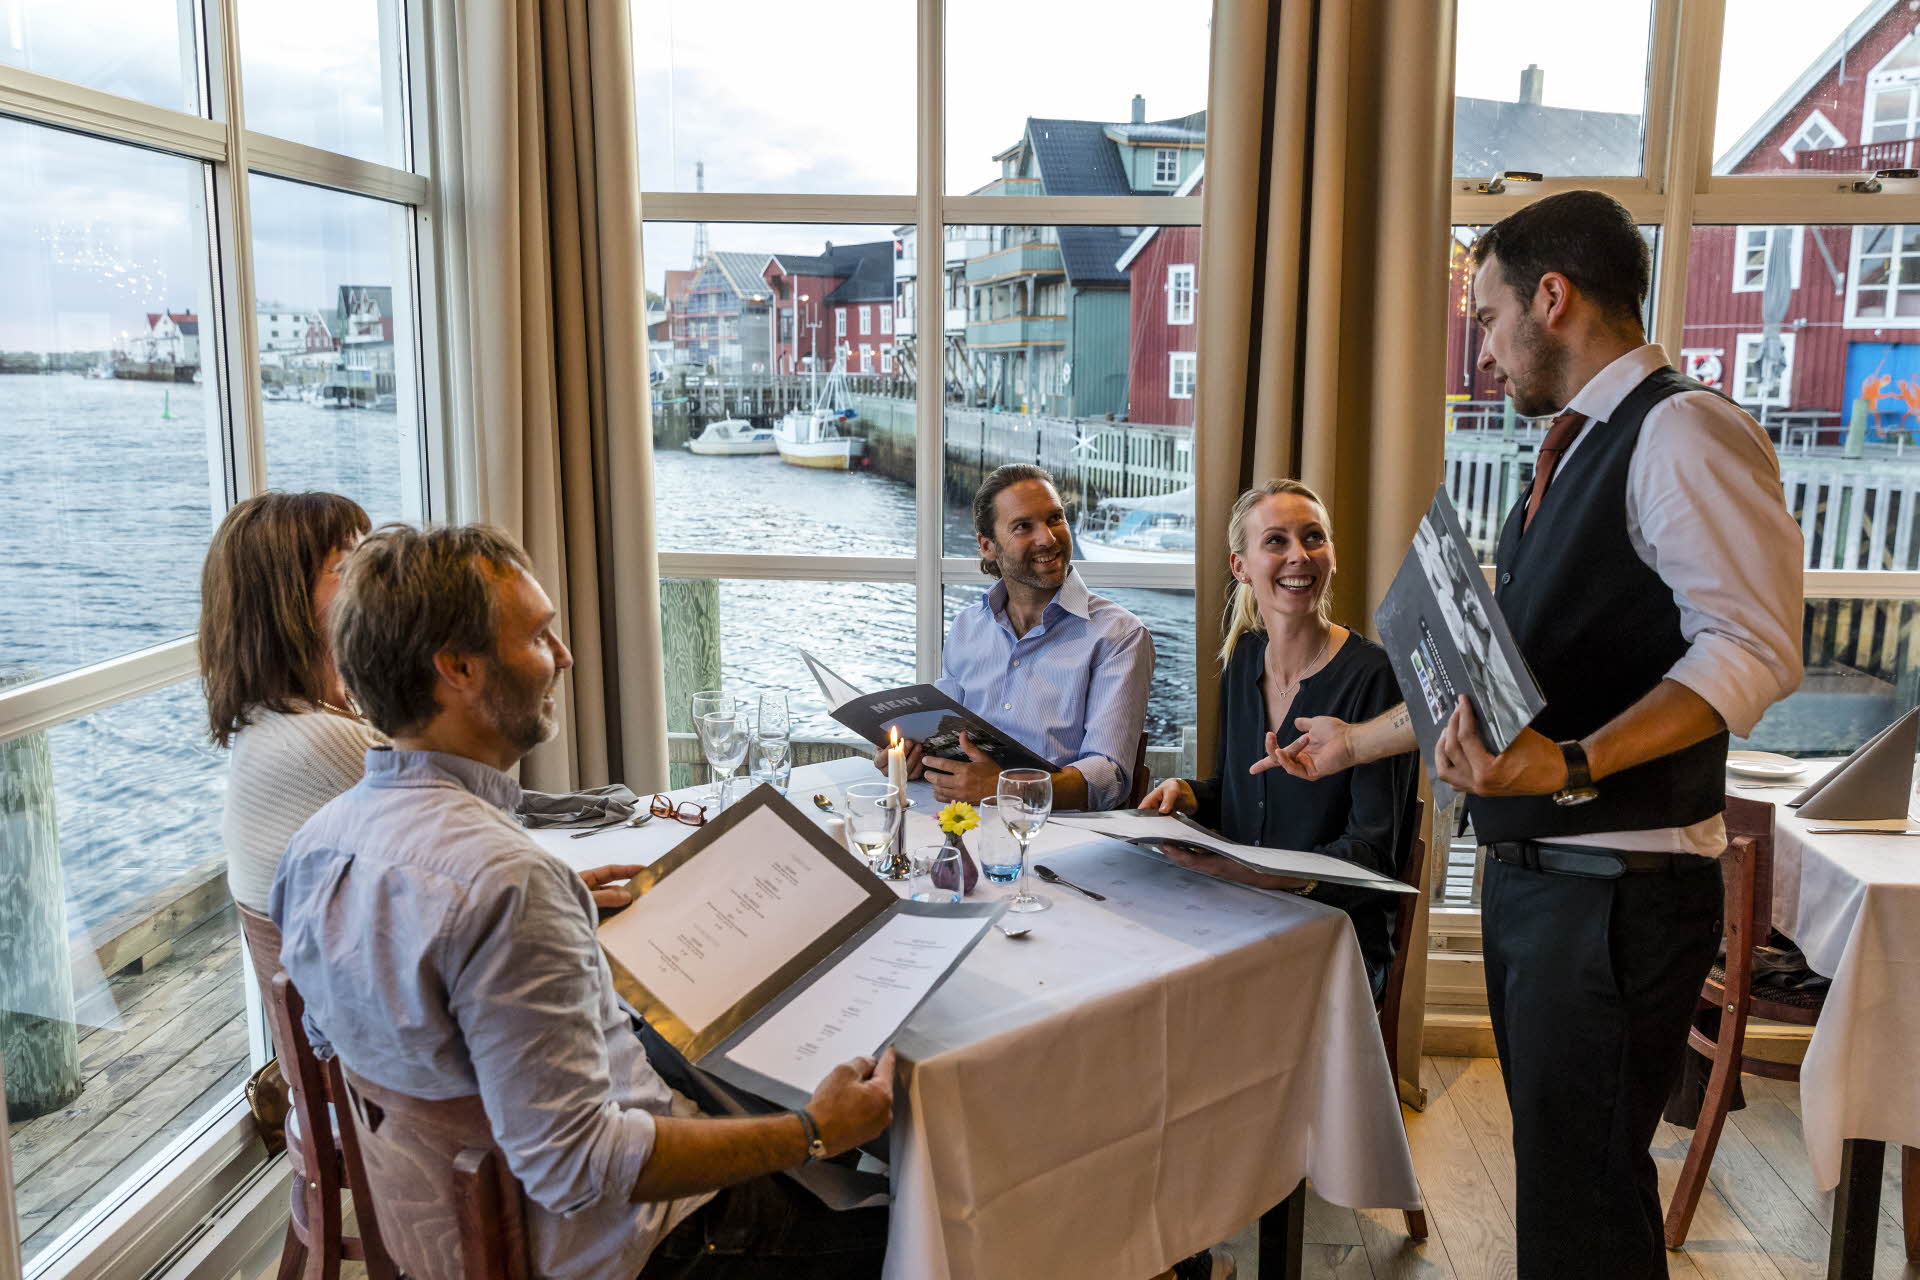 Four guests and a waiter at a table in the Blue Fish restaurant in Henningsvær. Large windows with views of the pier.